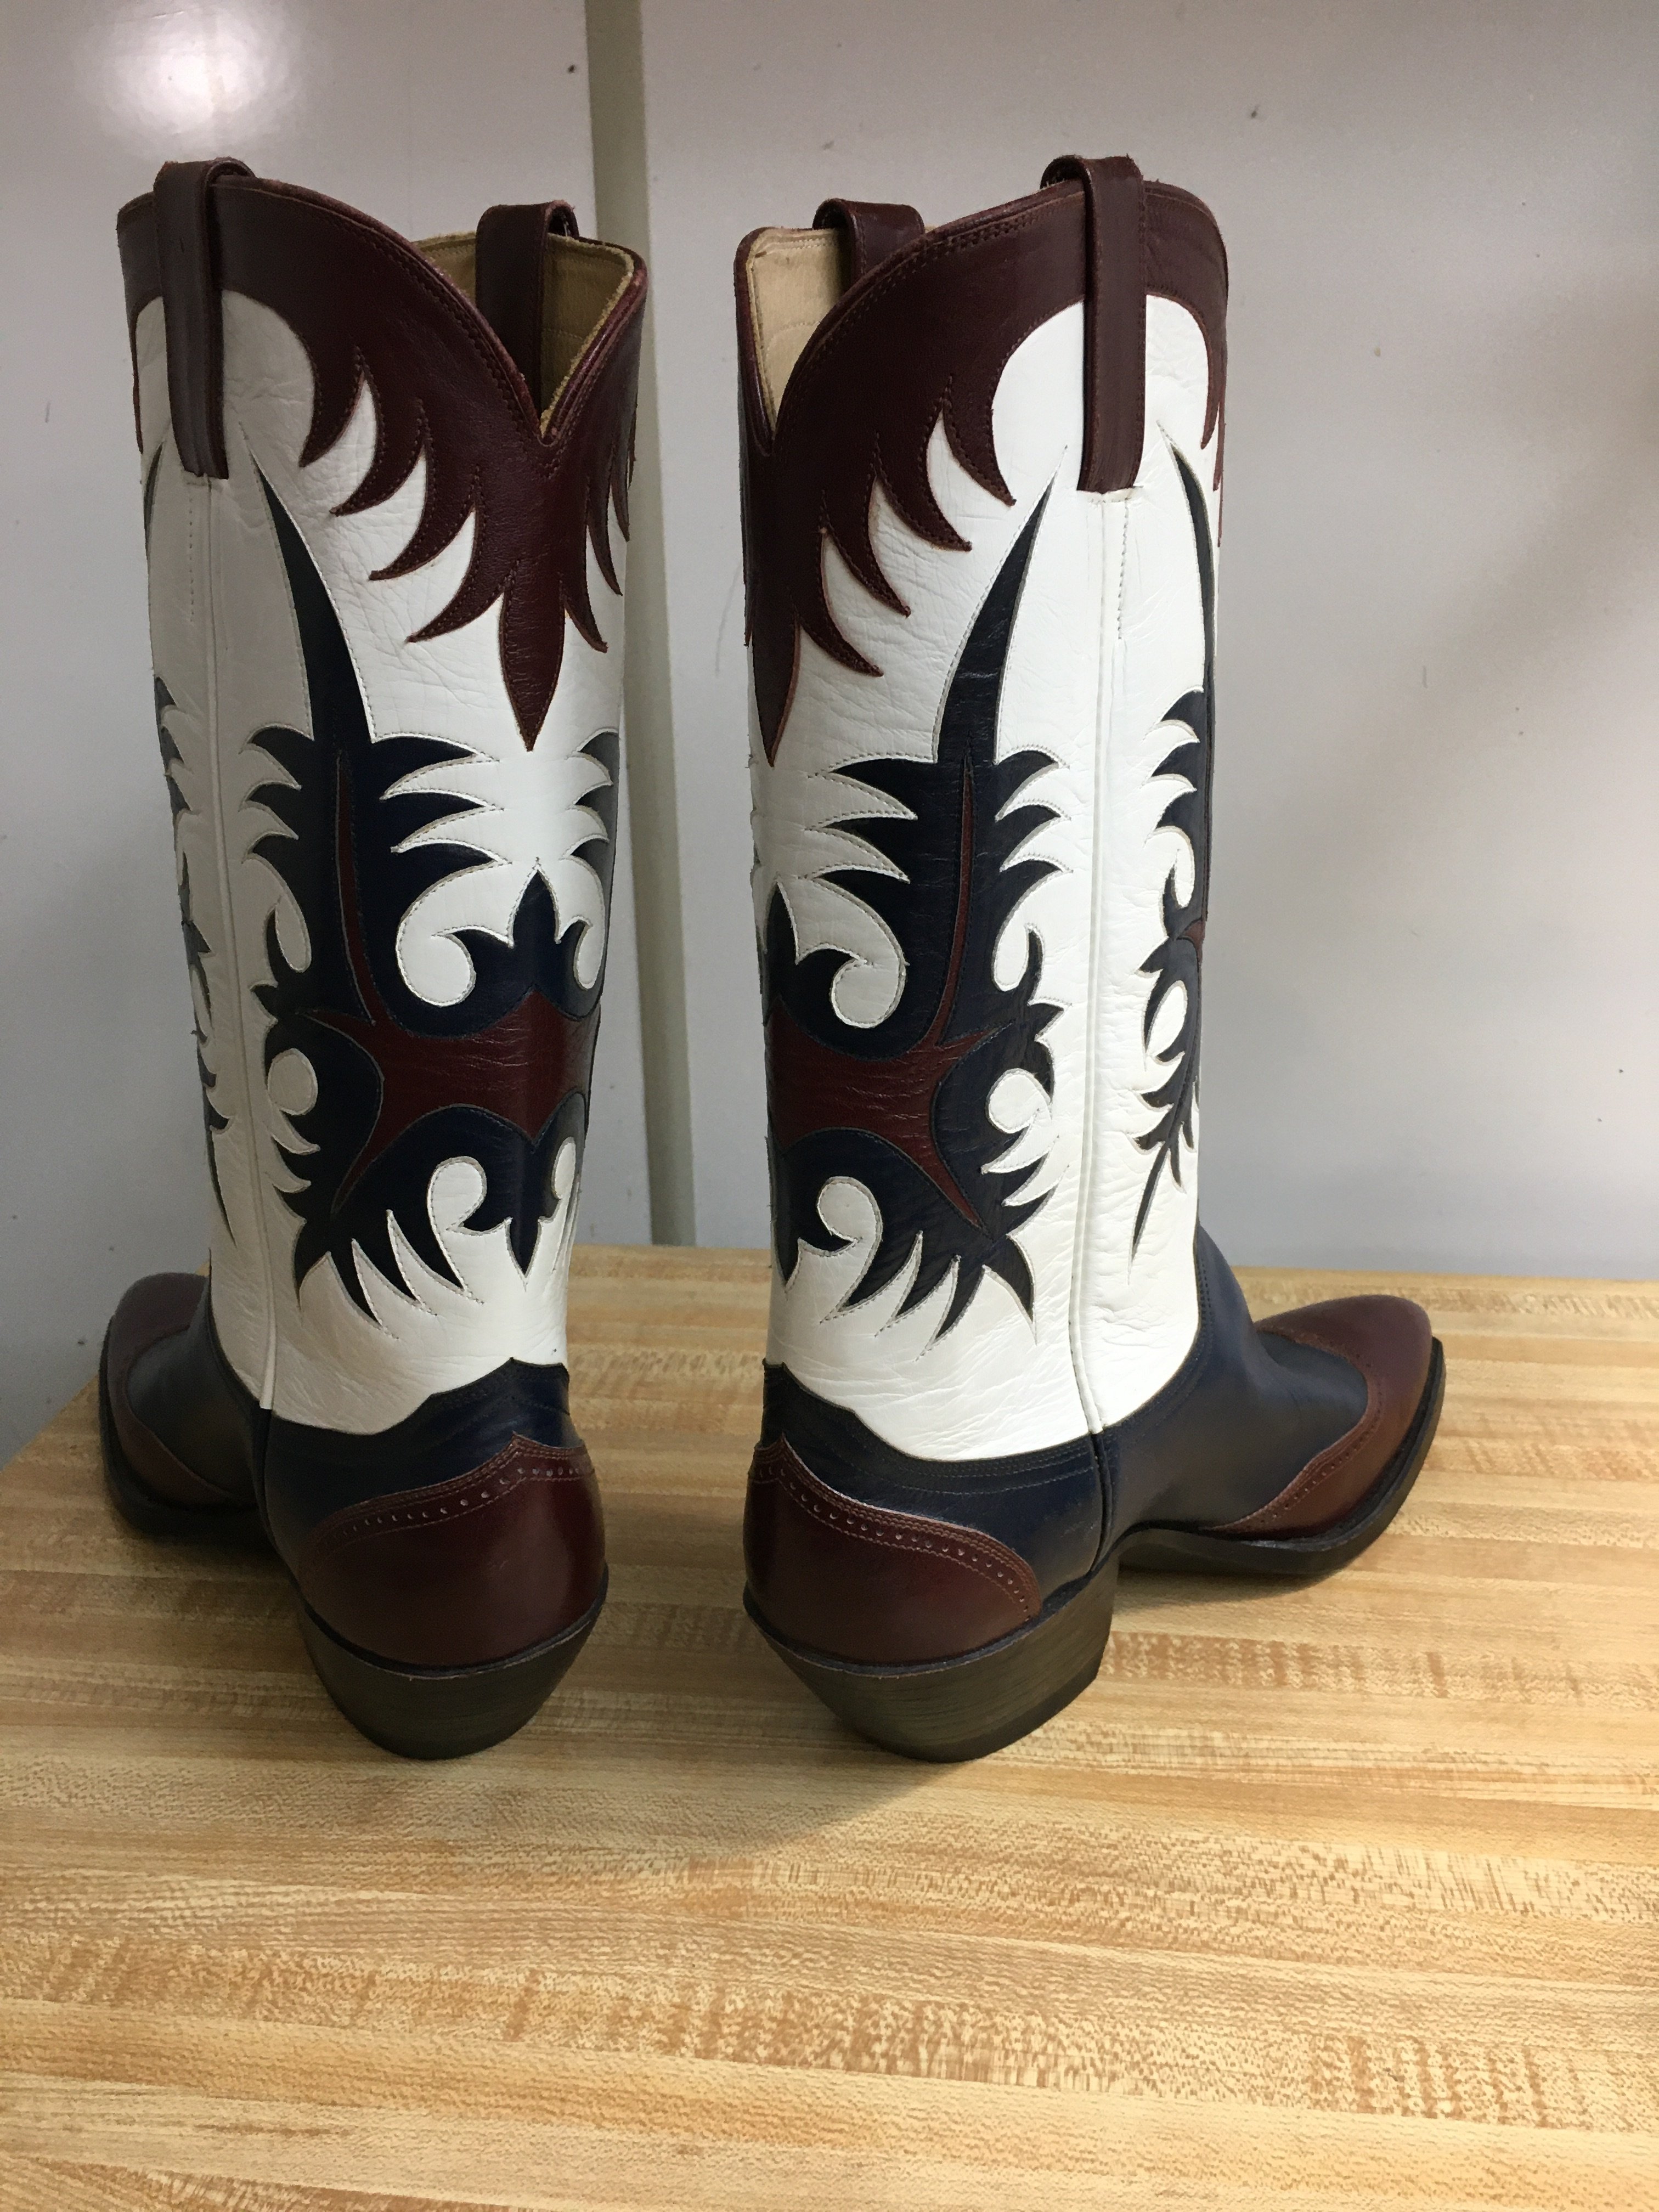 Trujillo's Shoe Shop - Shoe & Boot Repair - Added a Vibram Montagna Sole  and Heel to these Ostrich cowboy boots. Ready for winter